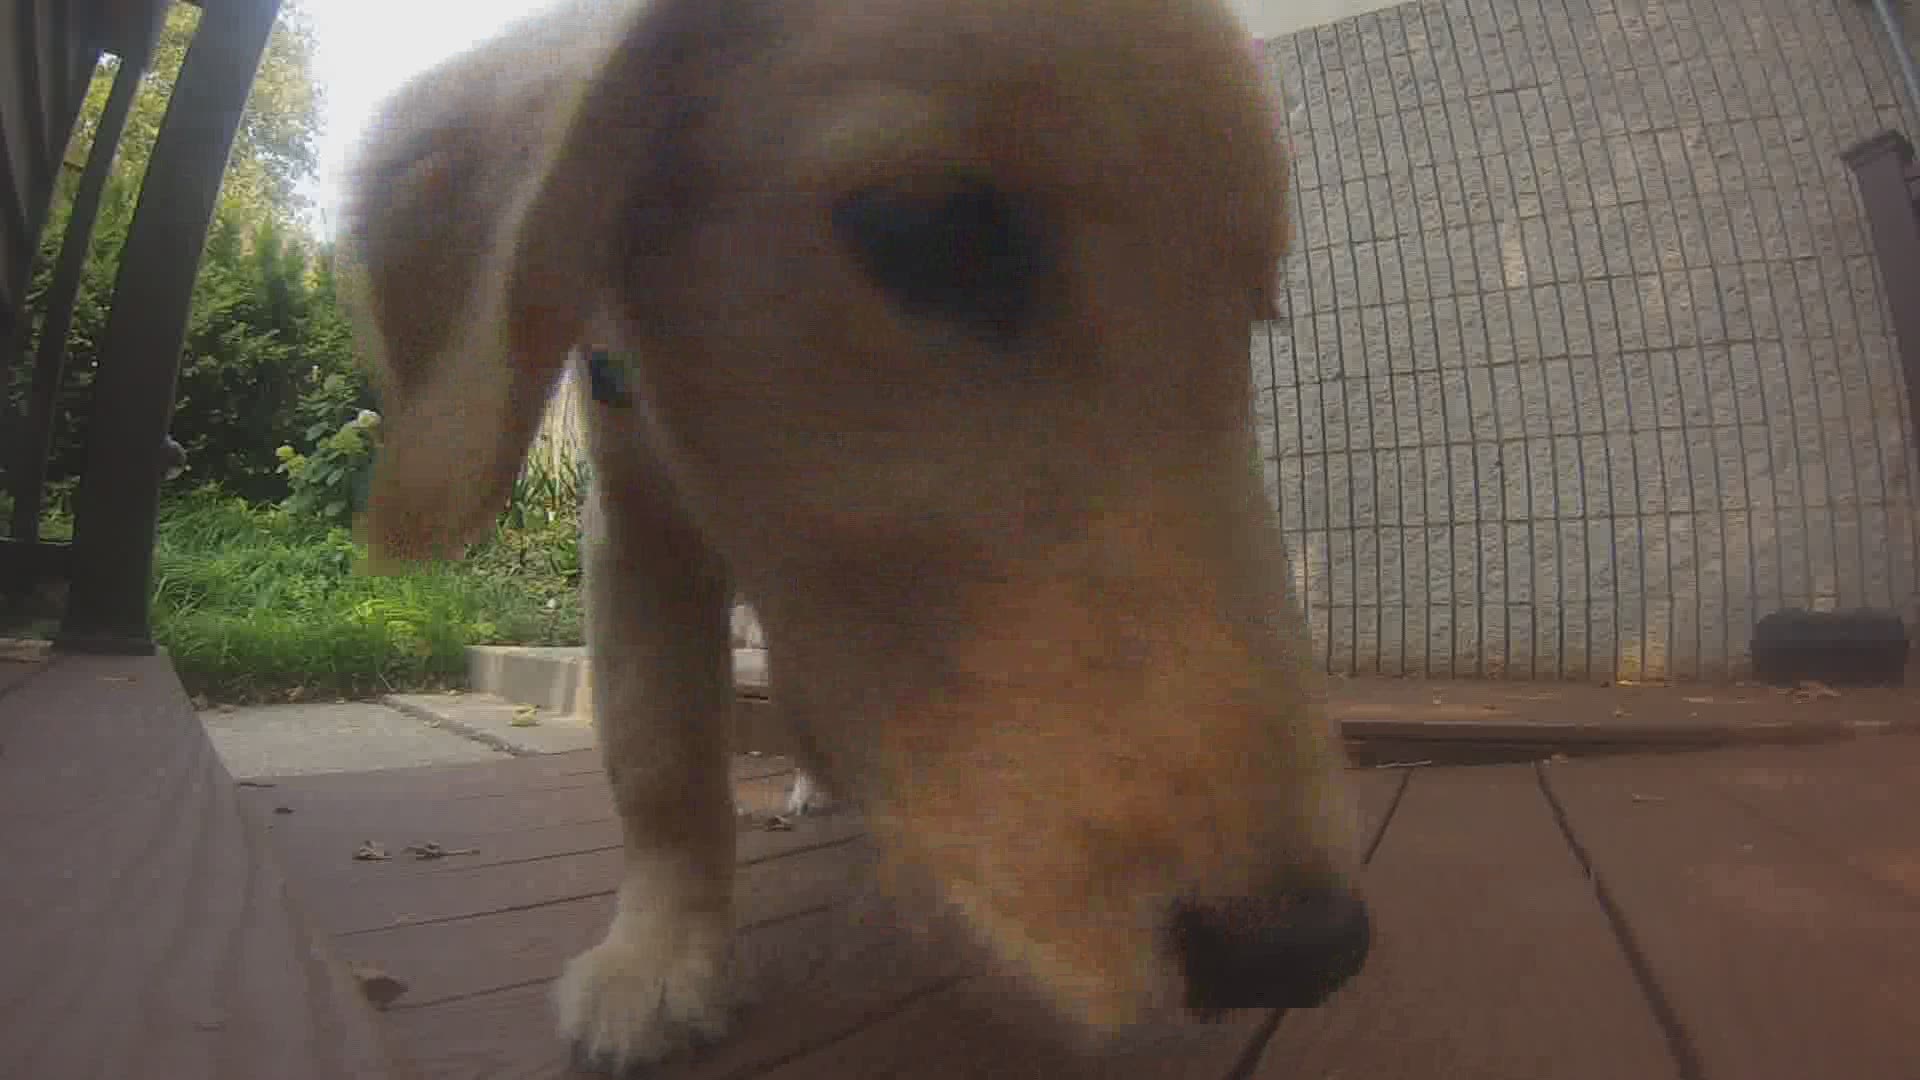 We gave Laker a camera today to follow her adventures during her visit with 13 ON YOUR SIDE.